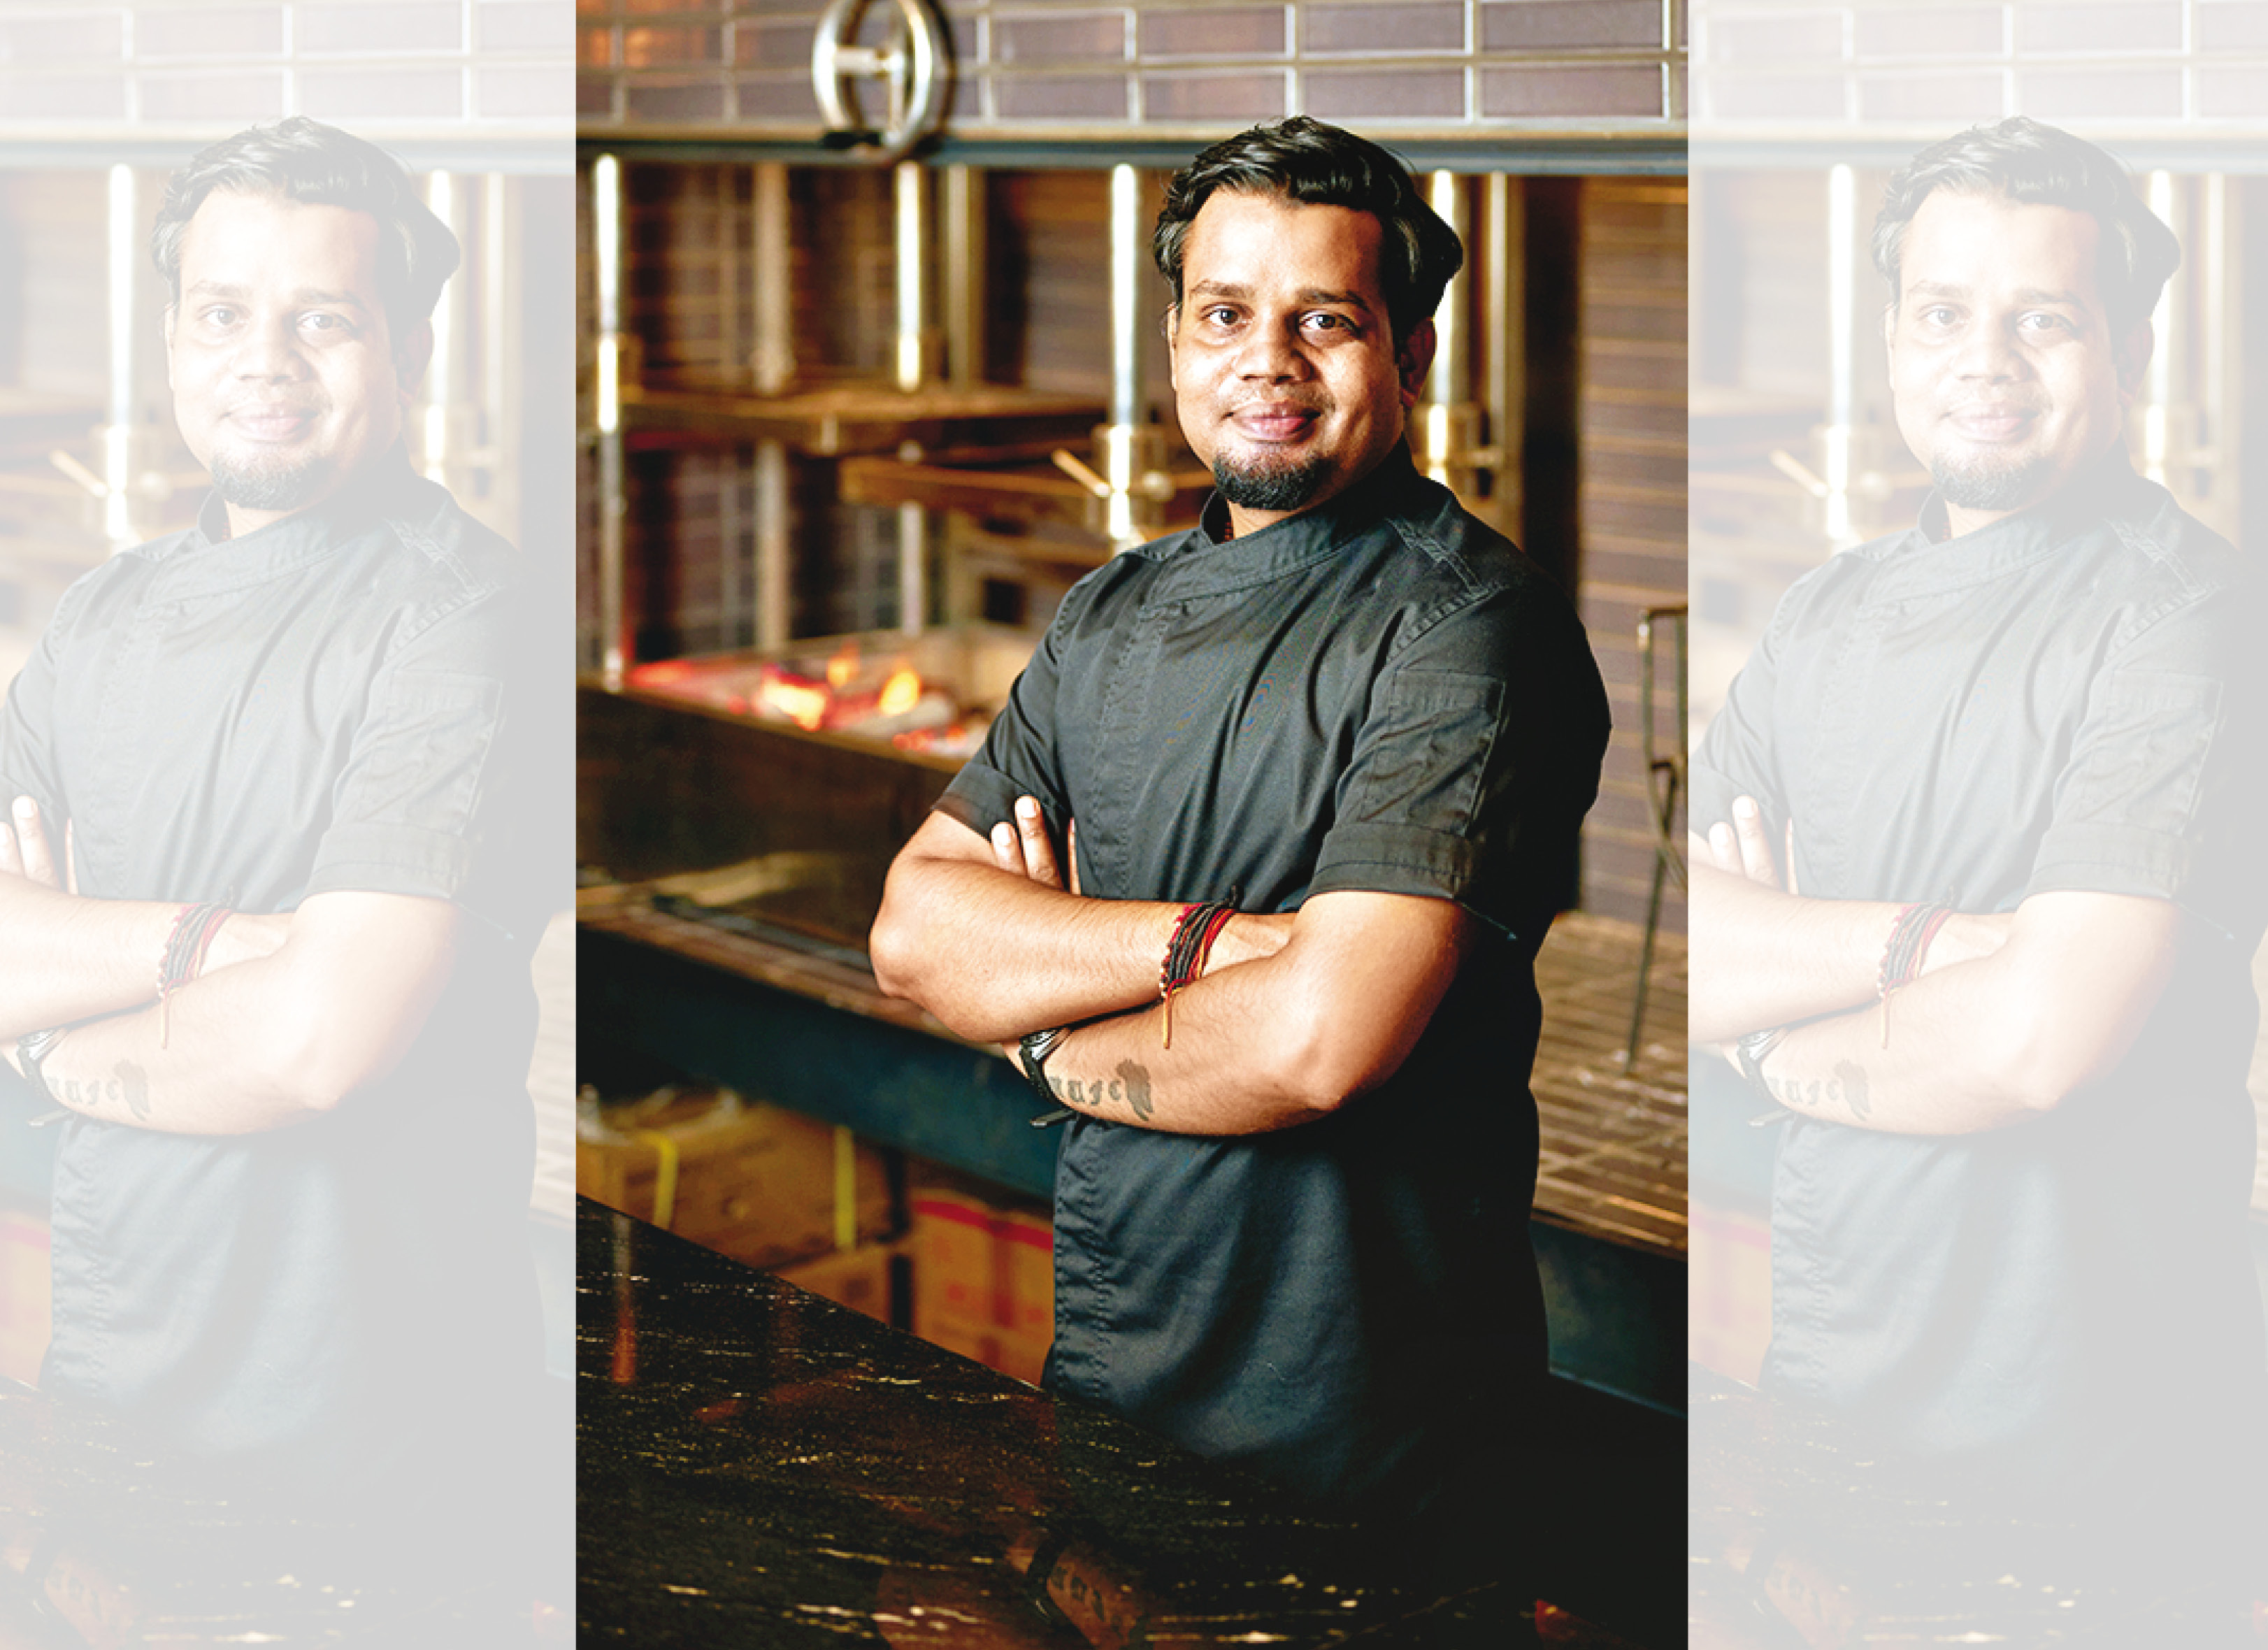 Saurabh Udinia has pushed Revolver in an adventurous new direction